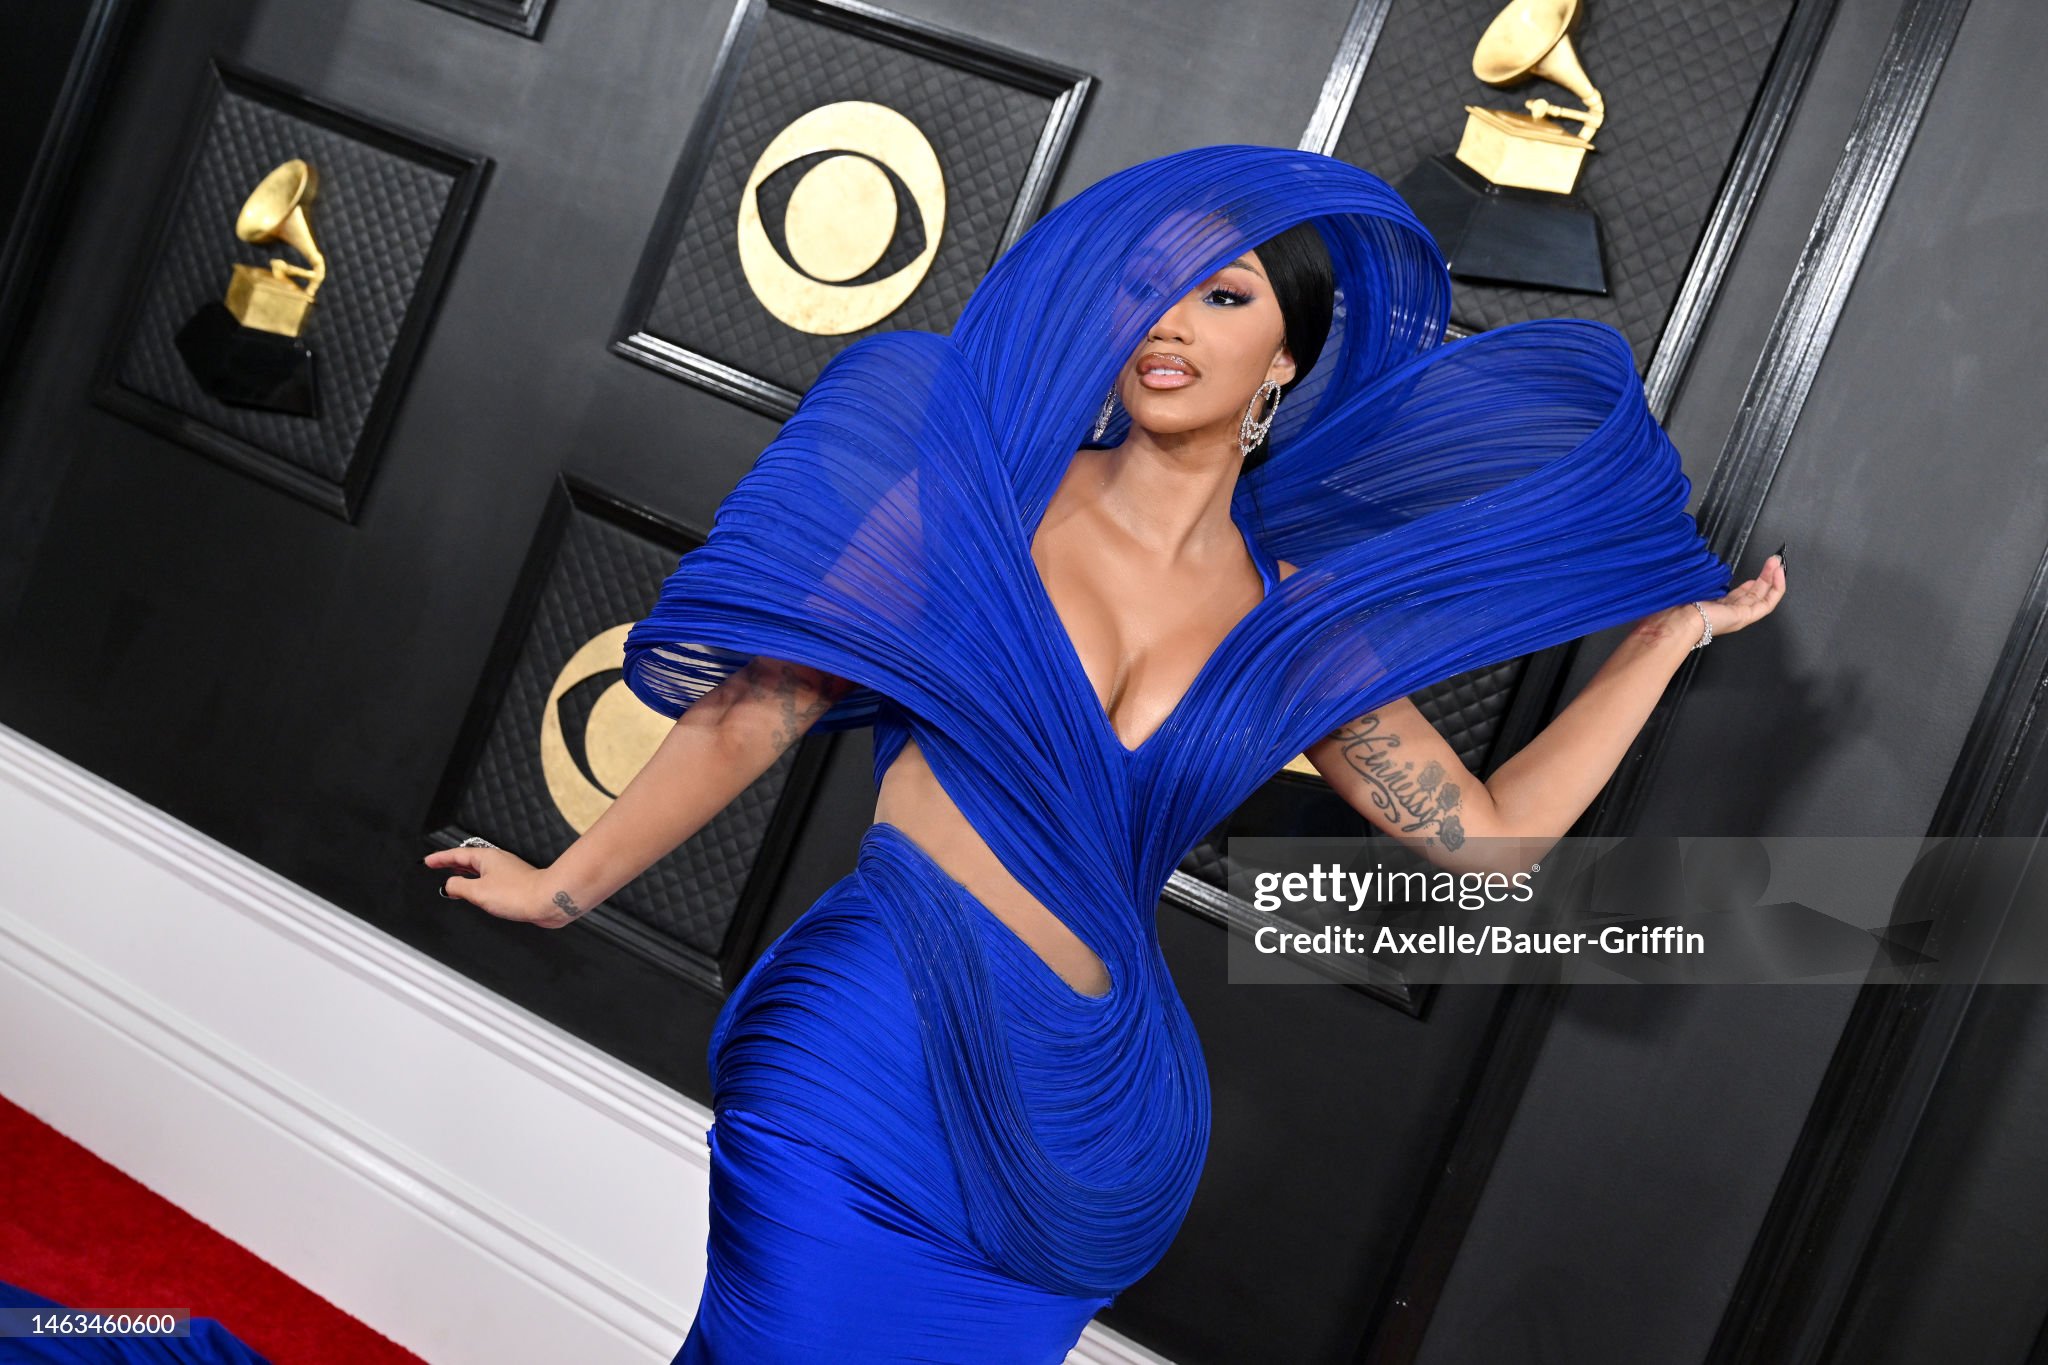 Cardi B From the 65th Annual GRAMMY Awards